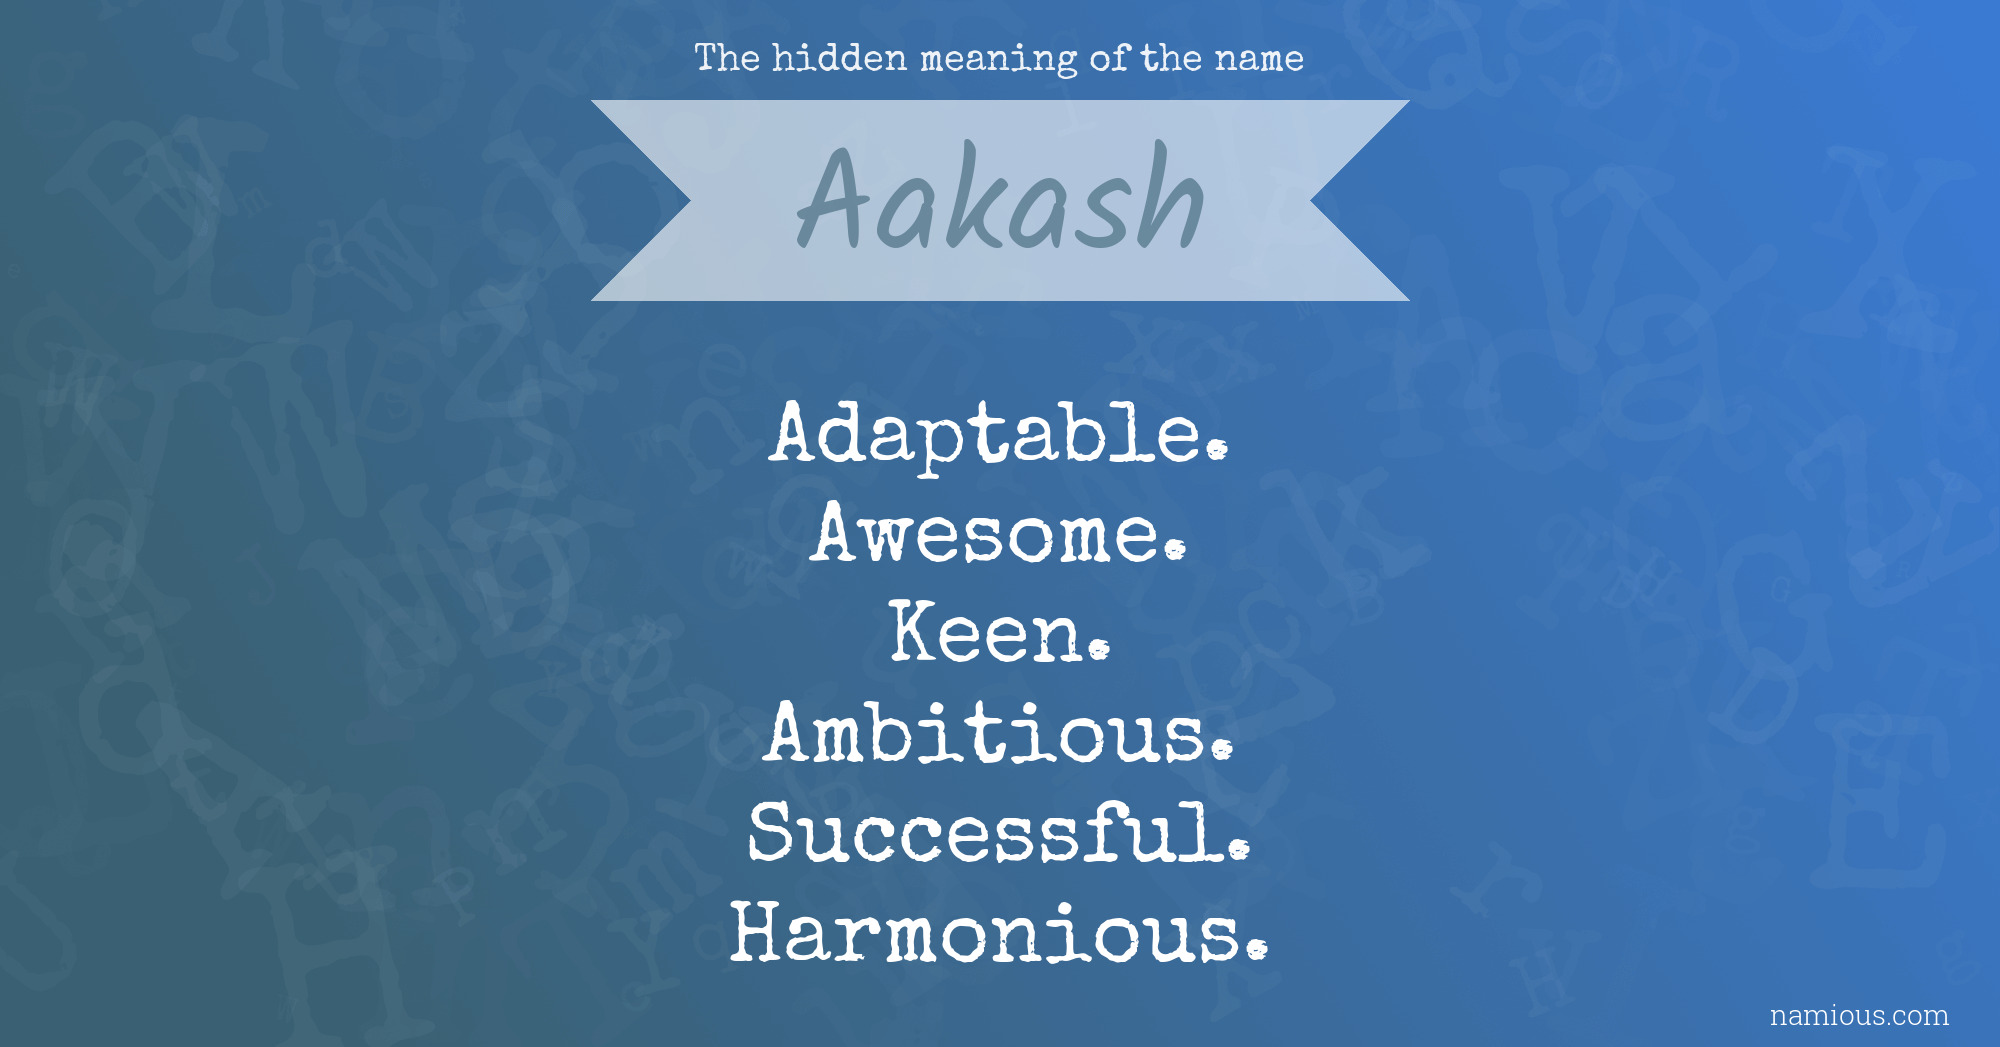 The hidden meaning of the name Aakash